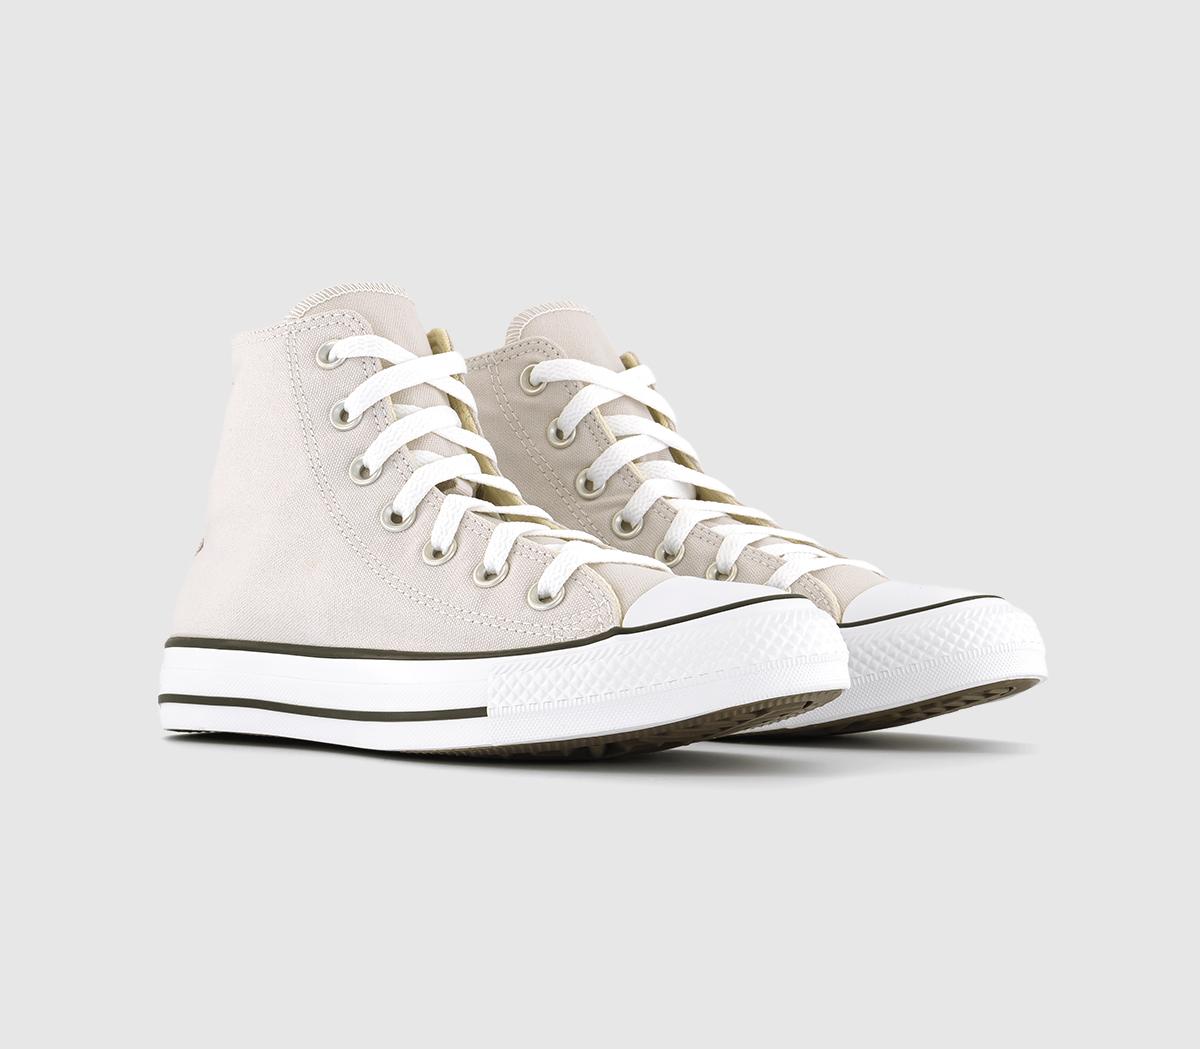 Converse All Star Hi Trainers Pale Putty White Black Natural, 5